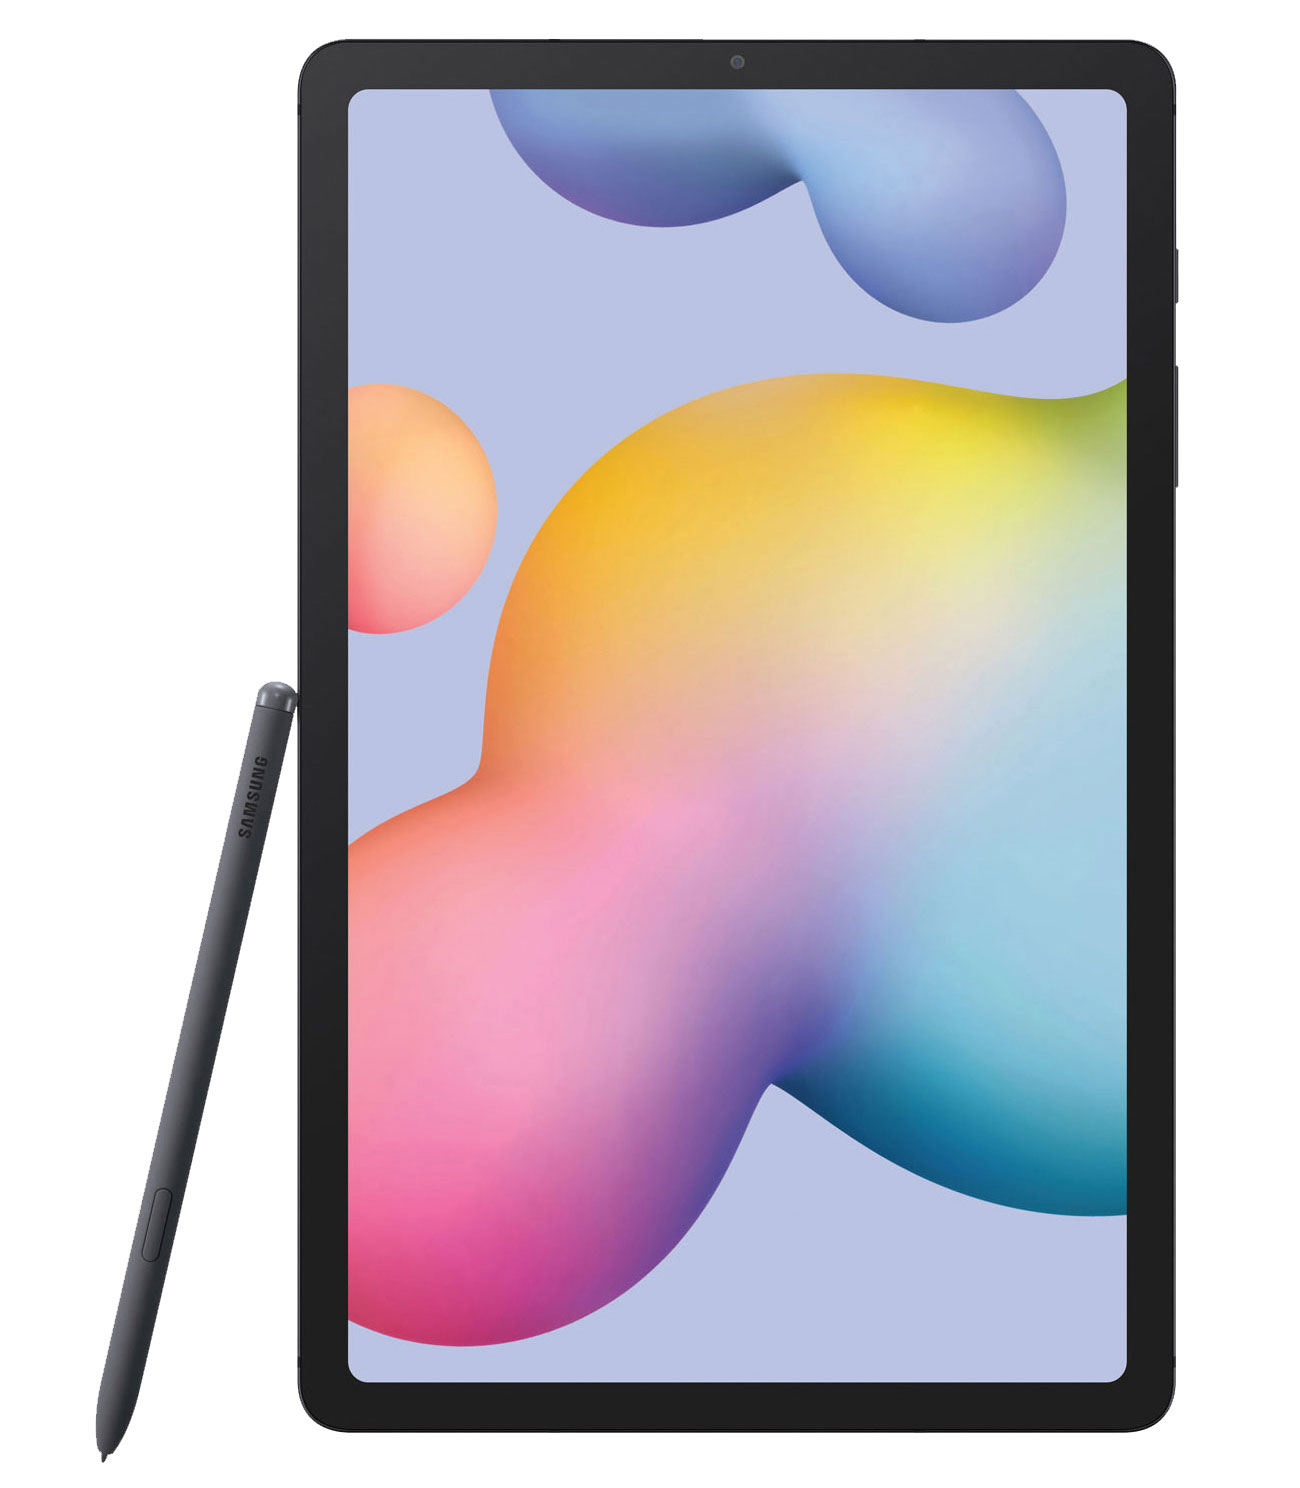 Tablette Samsung Galaxy Tab S6 Lite 10,4 po 64 Go Android 12 avec Snapdragon